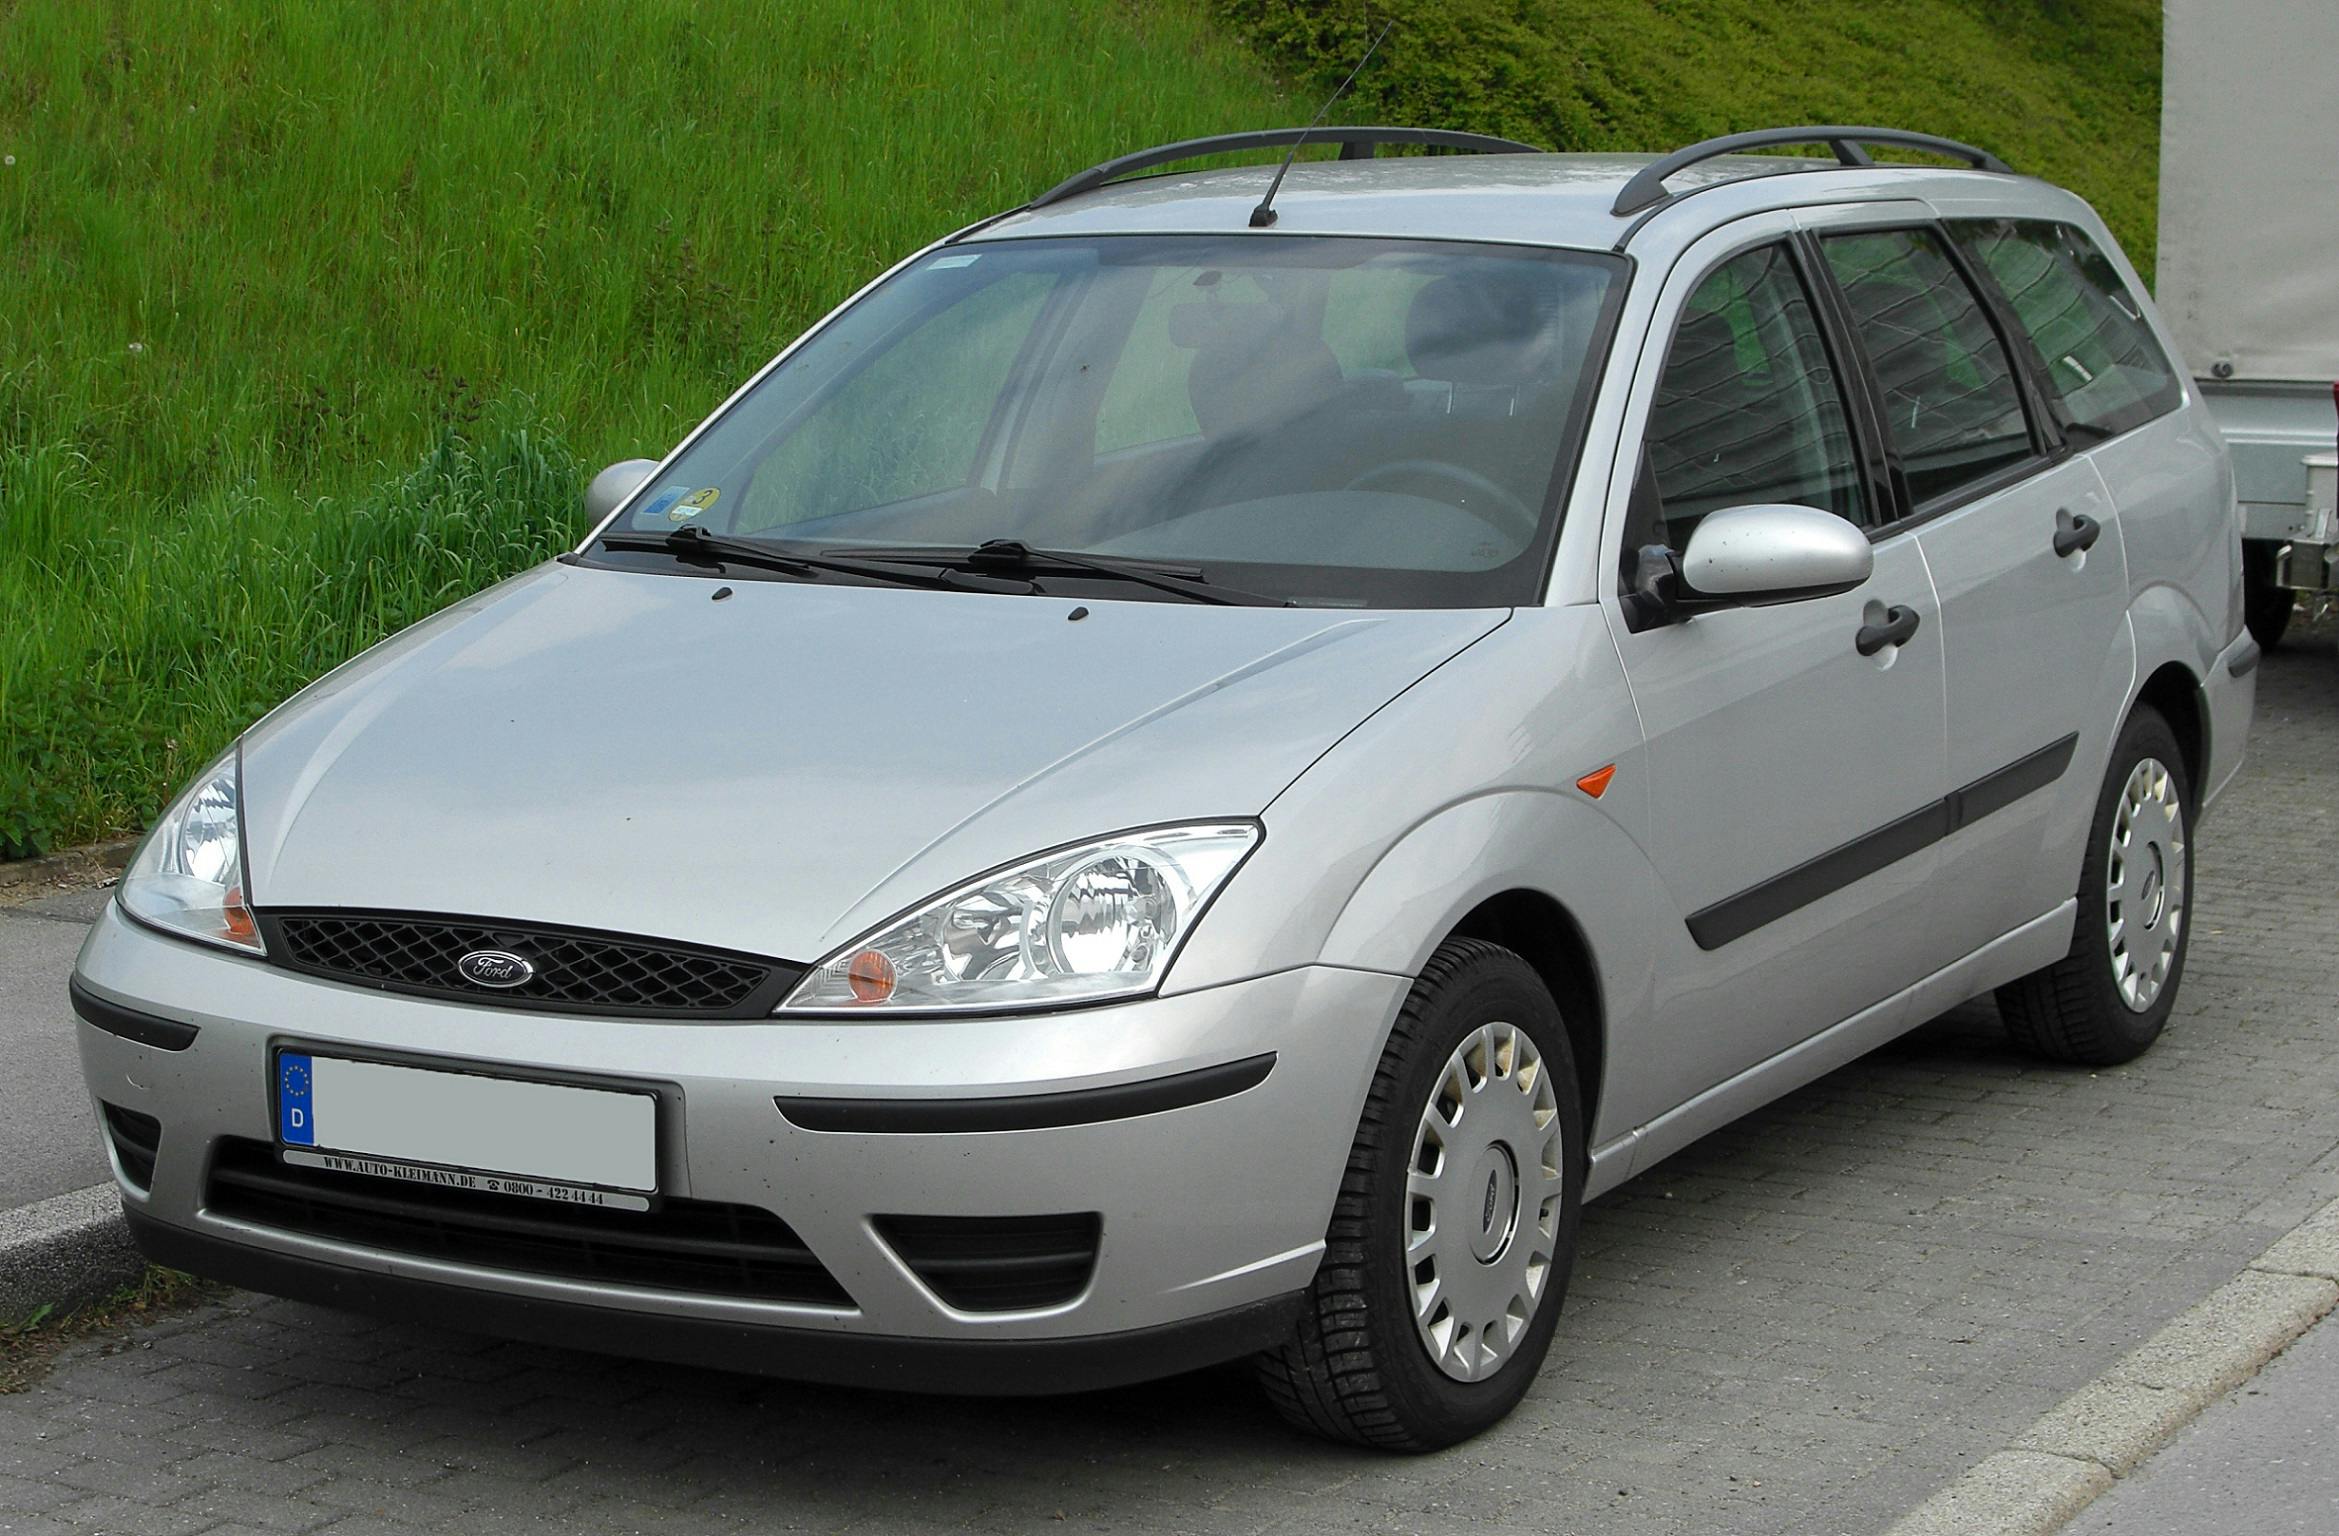 https://images.prismic.io/shacarlacca%2F2a5c1cd2-3c56-4ce0-97d6-cd59f4d3b2e4_ford_focus_turnier_i_1.8_tddi_facelift_front_20100509.jpg?auto=compress,format&rect=0,0,2339,1536&w=2339&h=1536